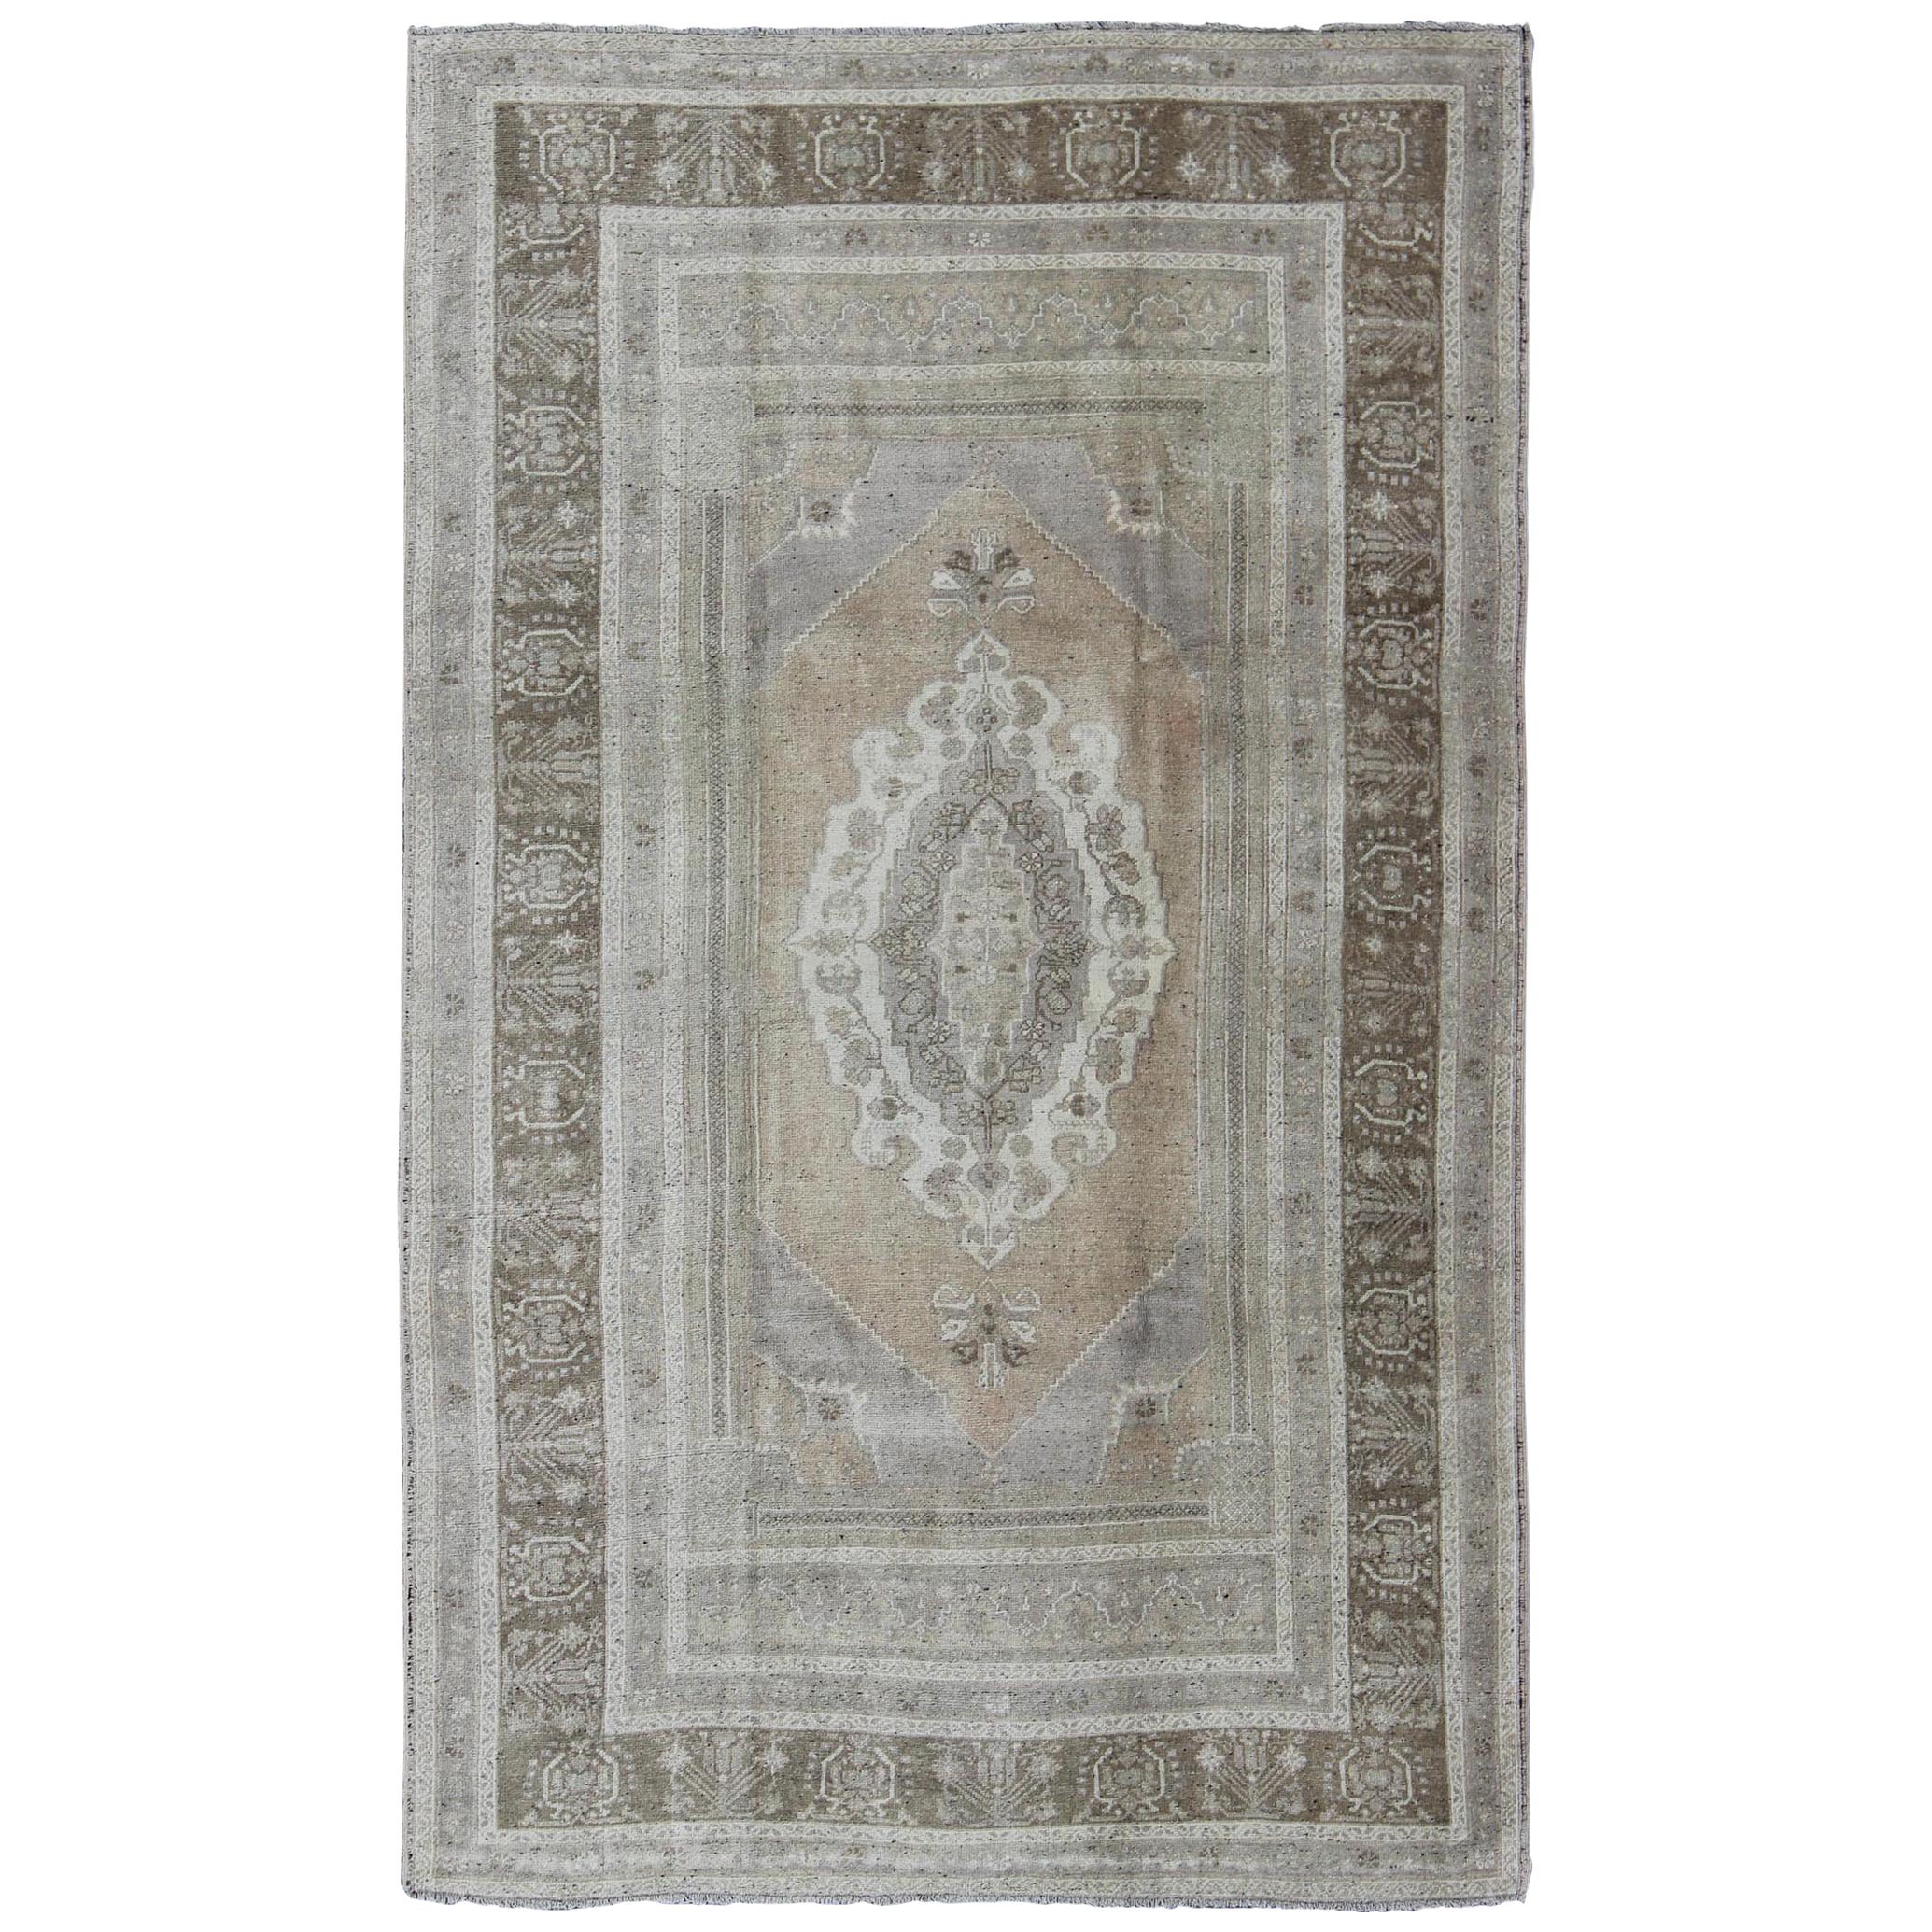 Warm Colored Layered Medallion Vintage Turkish Oushak Rug in Taupe, Gray, Brown